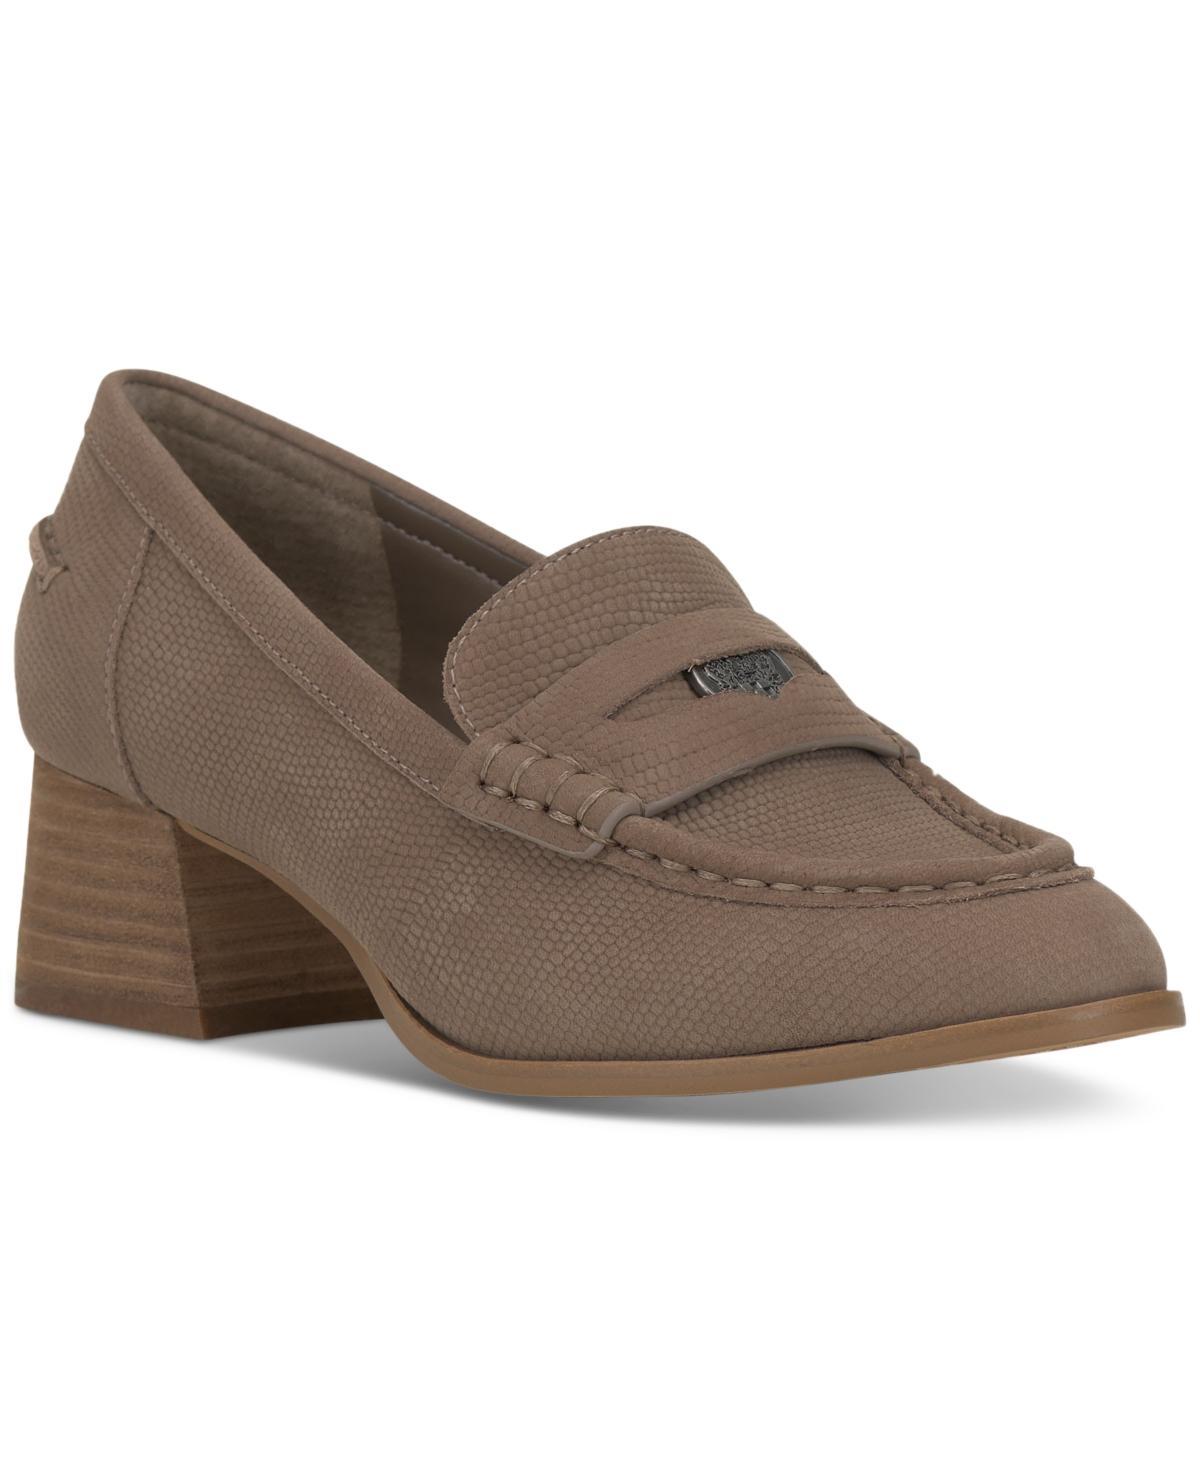 Vince Camuto Carissla Loafer Pump Product Image